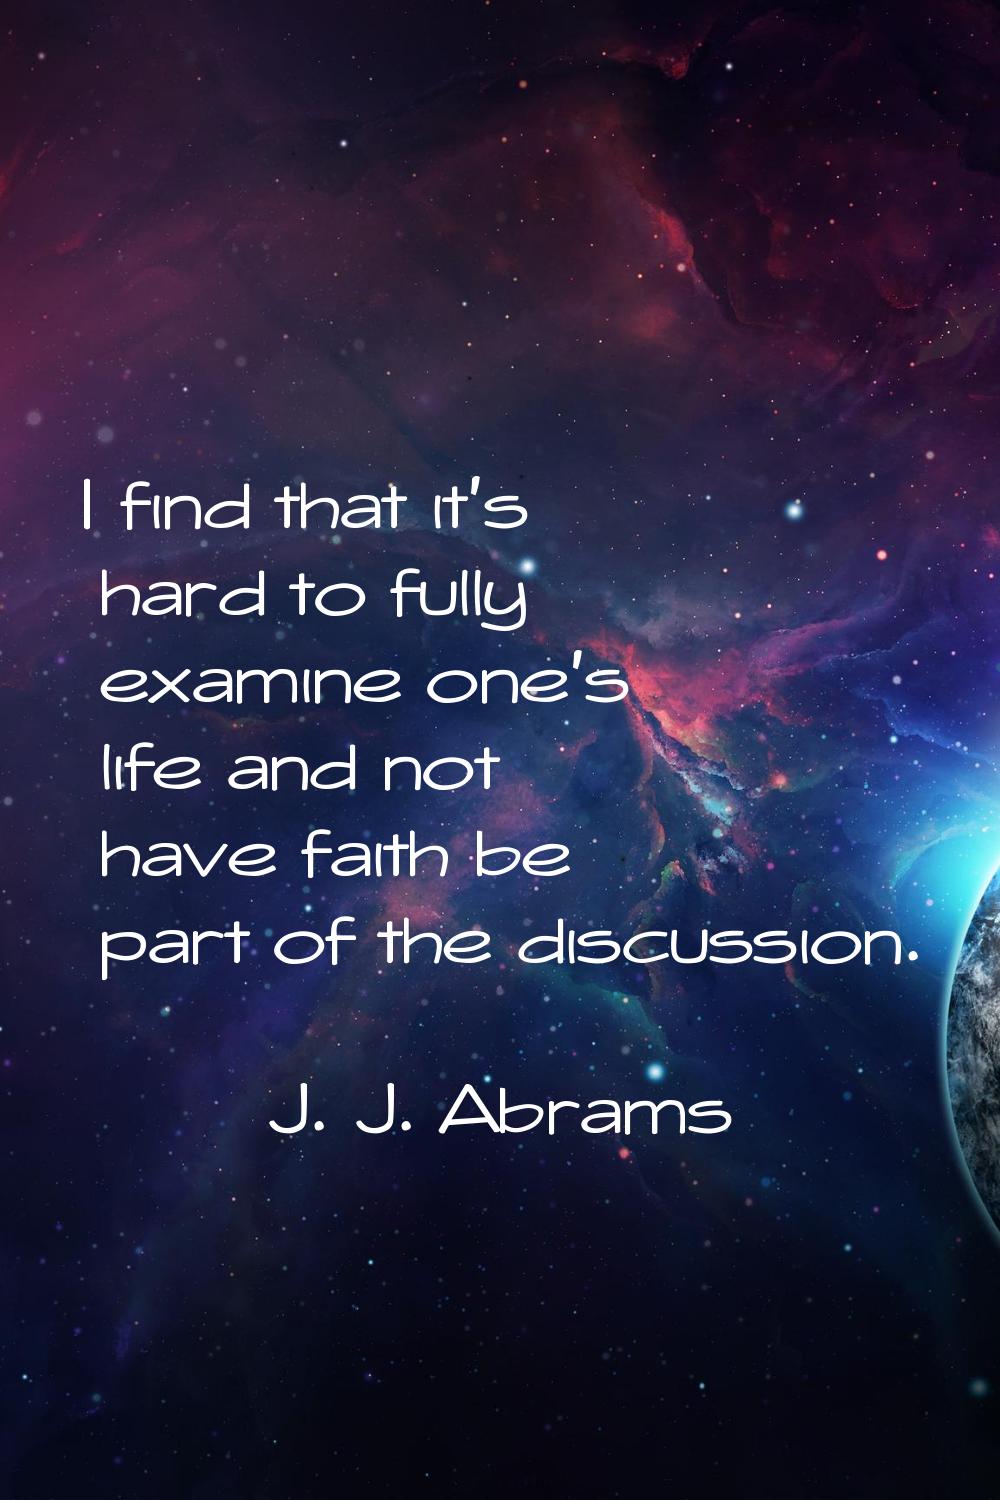 I find that it's hard to fully examine one's life and not have faith be part of the discussion.